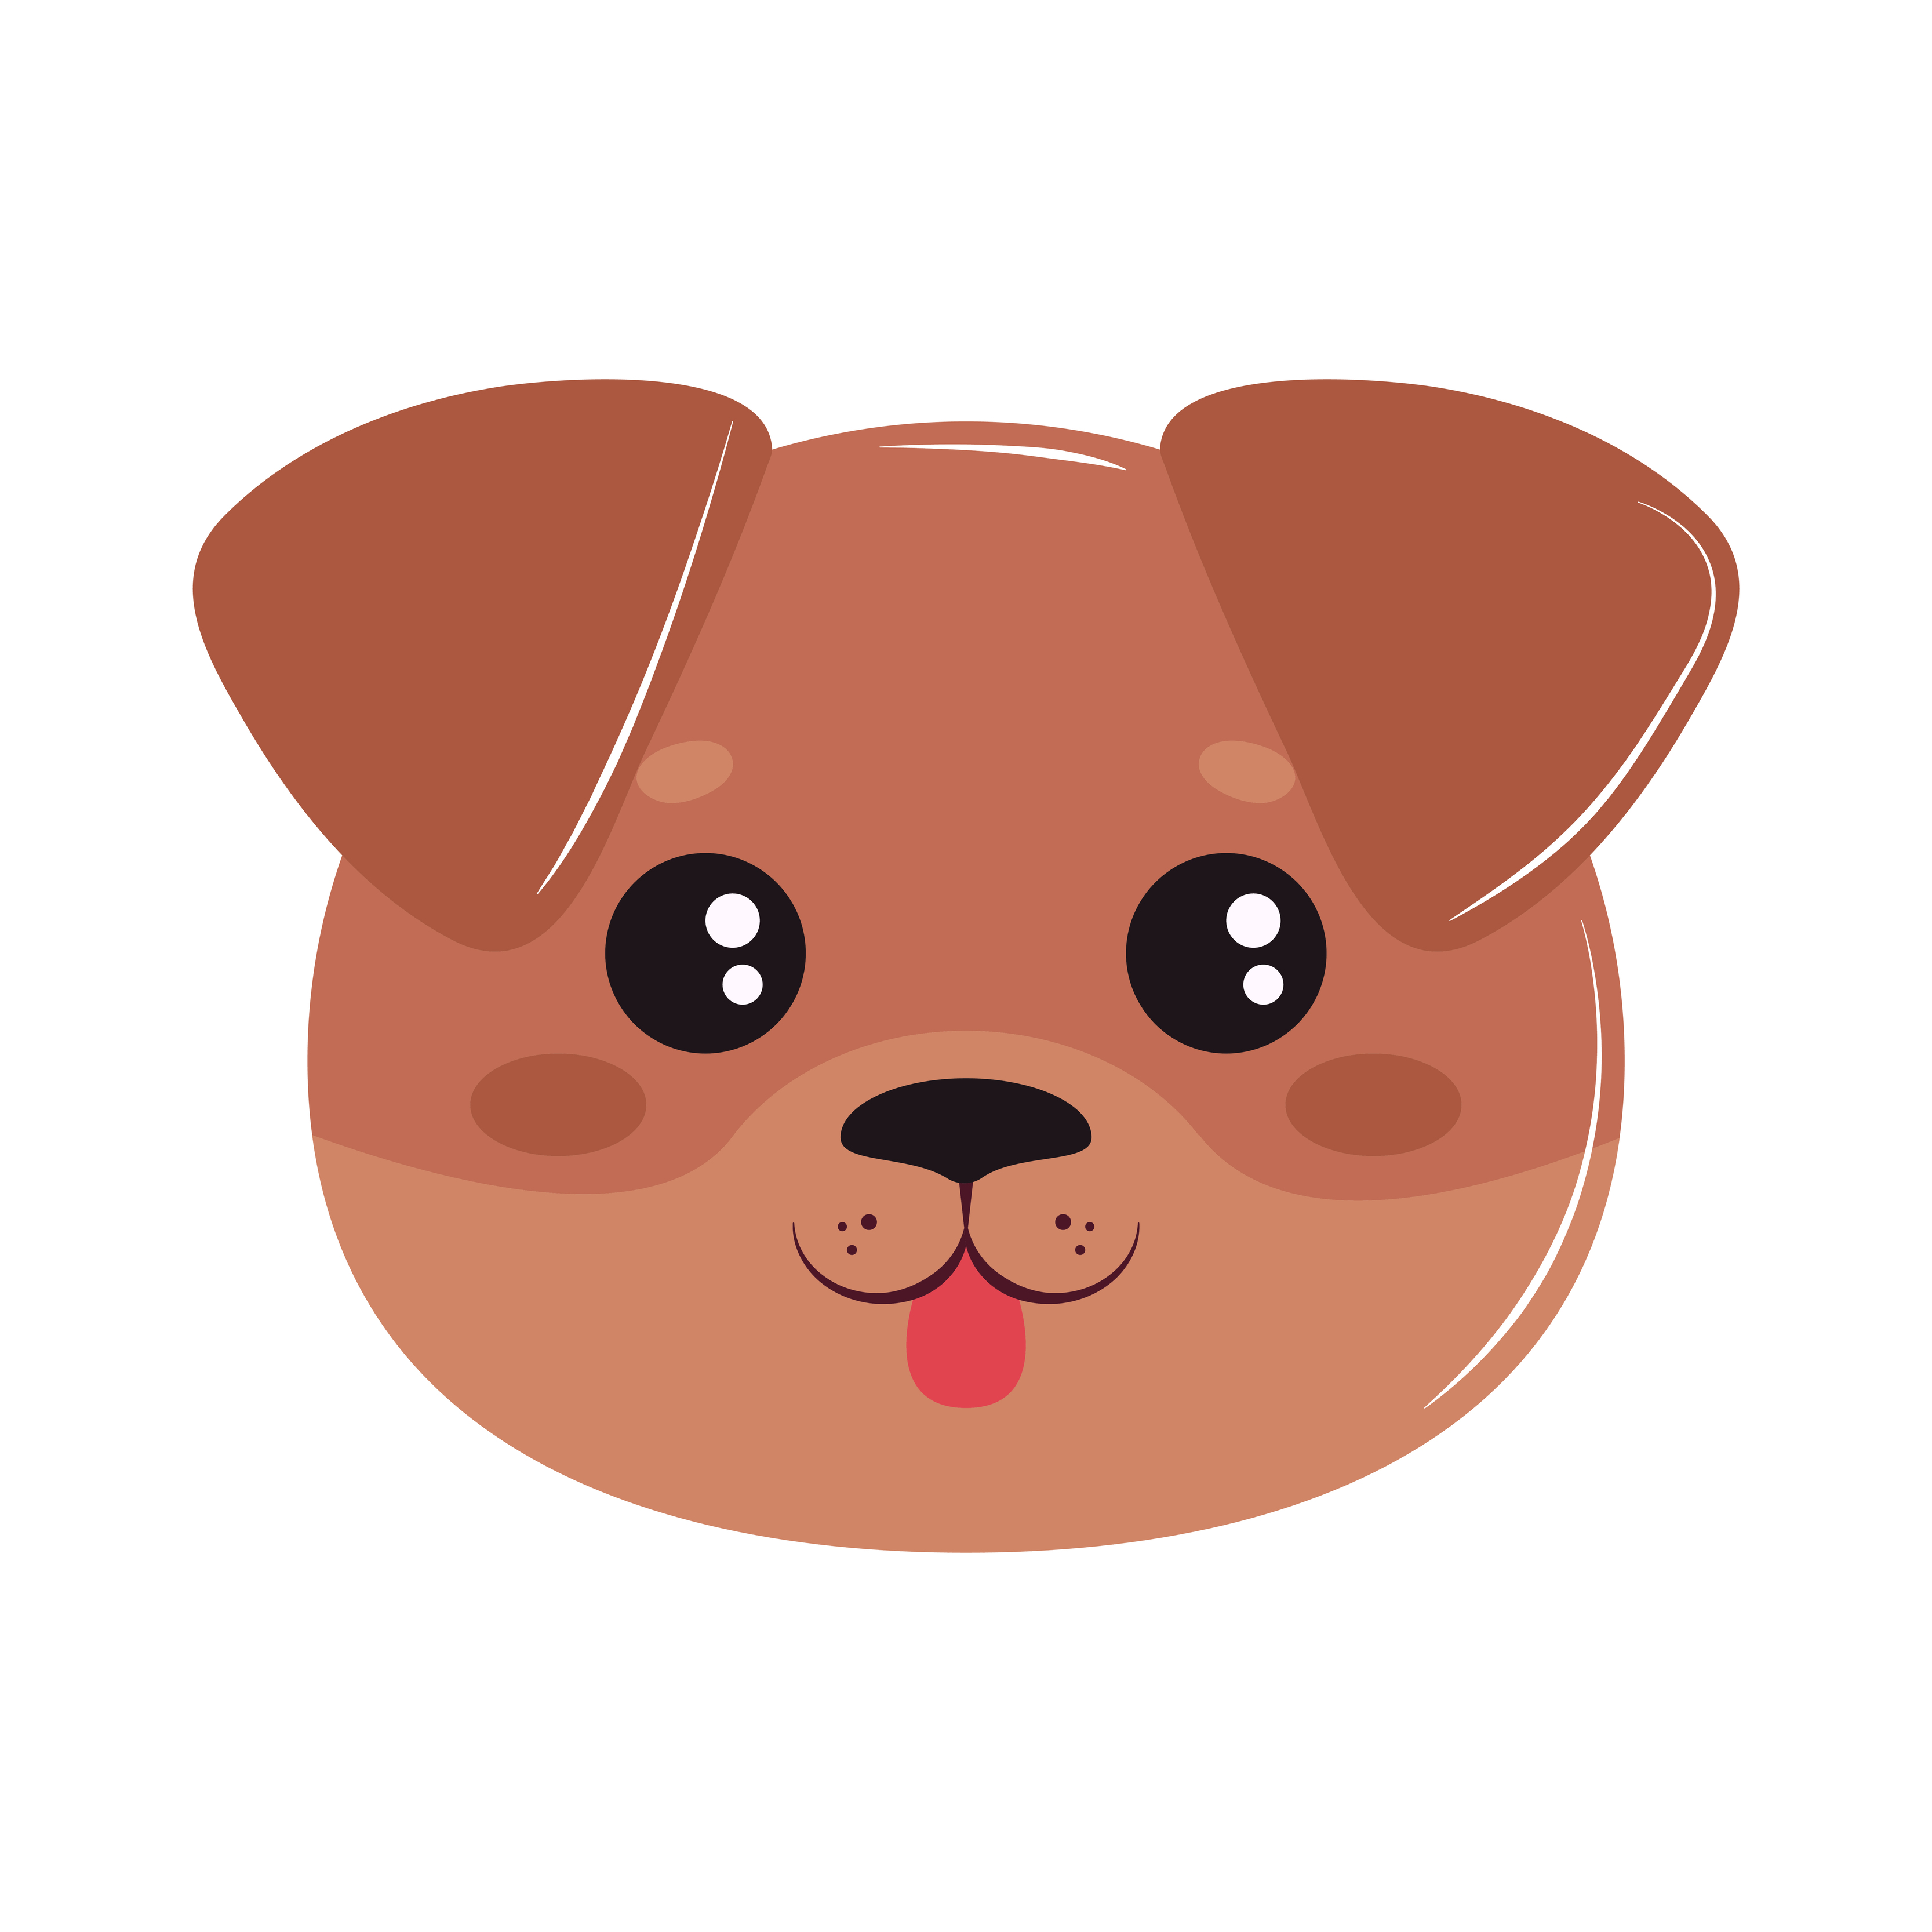 Cute yorkshire terrier dog avatar Royalty Free Vector Image